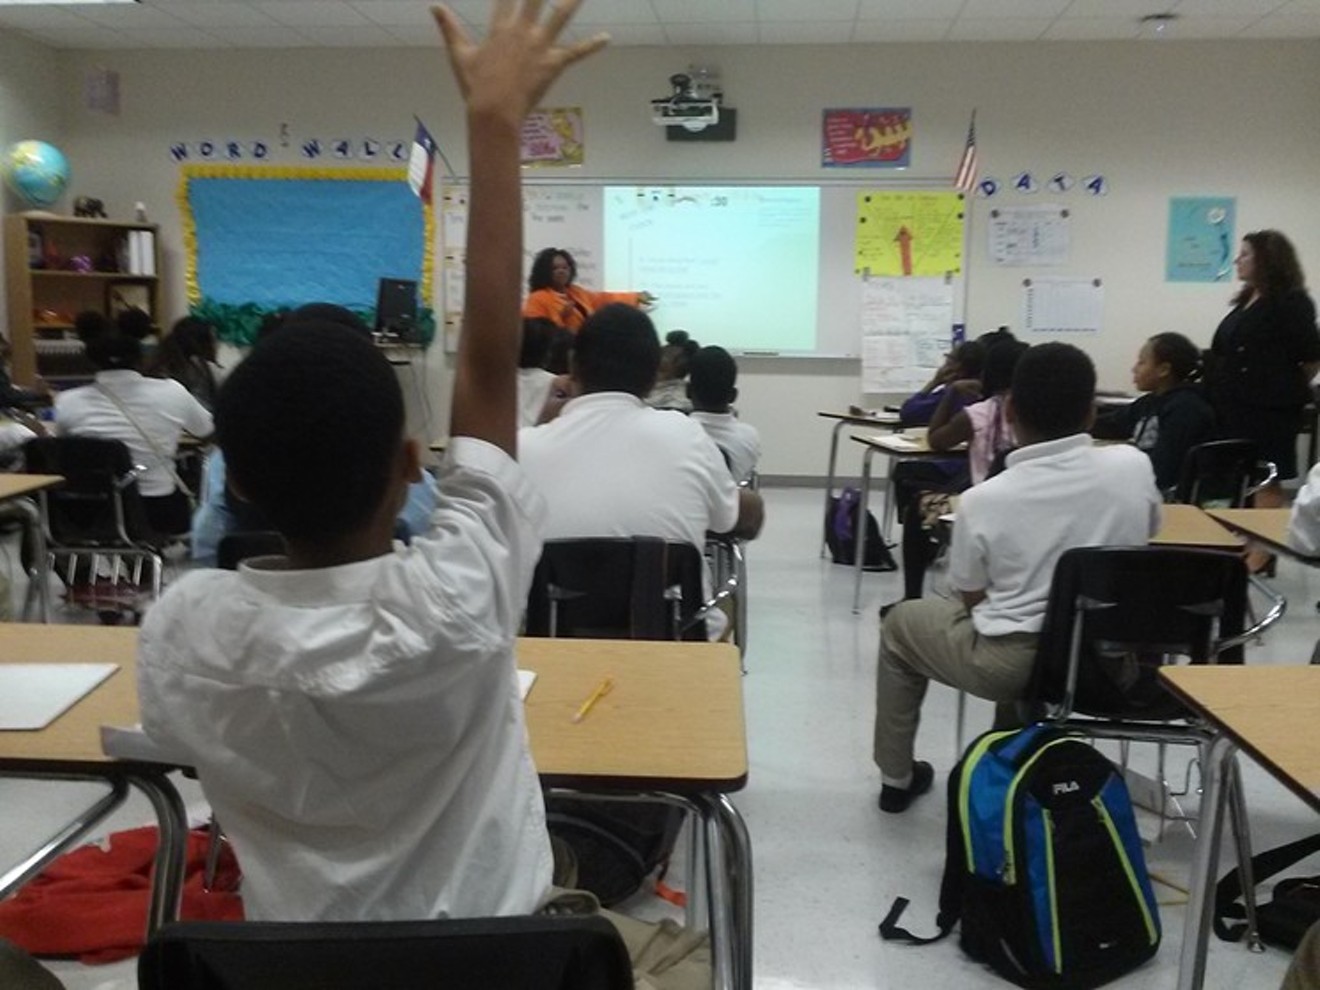 Billie Earl Dade Middle School is one of several schools where a system based on merit pay for teachers has produced exciting improvements in learning.